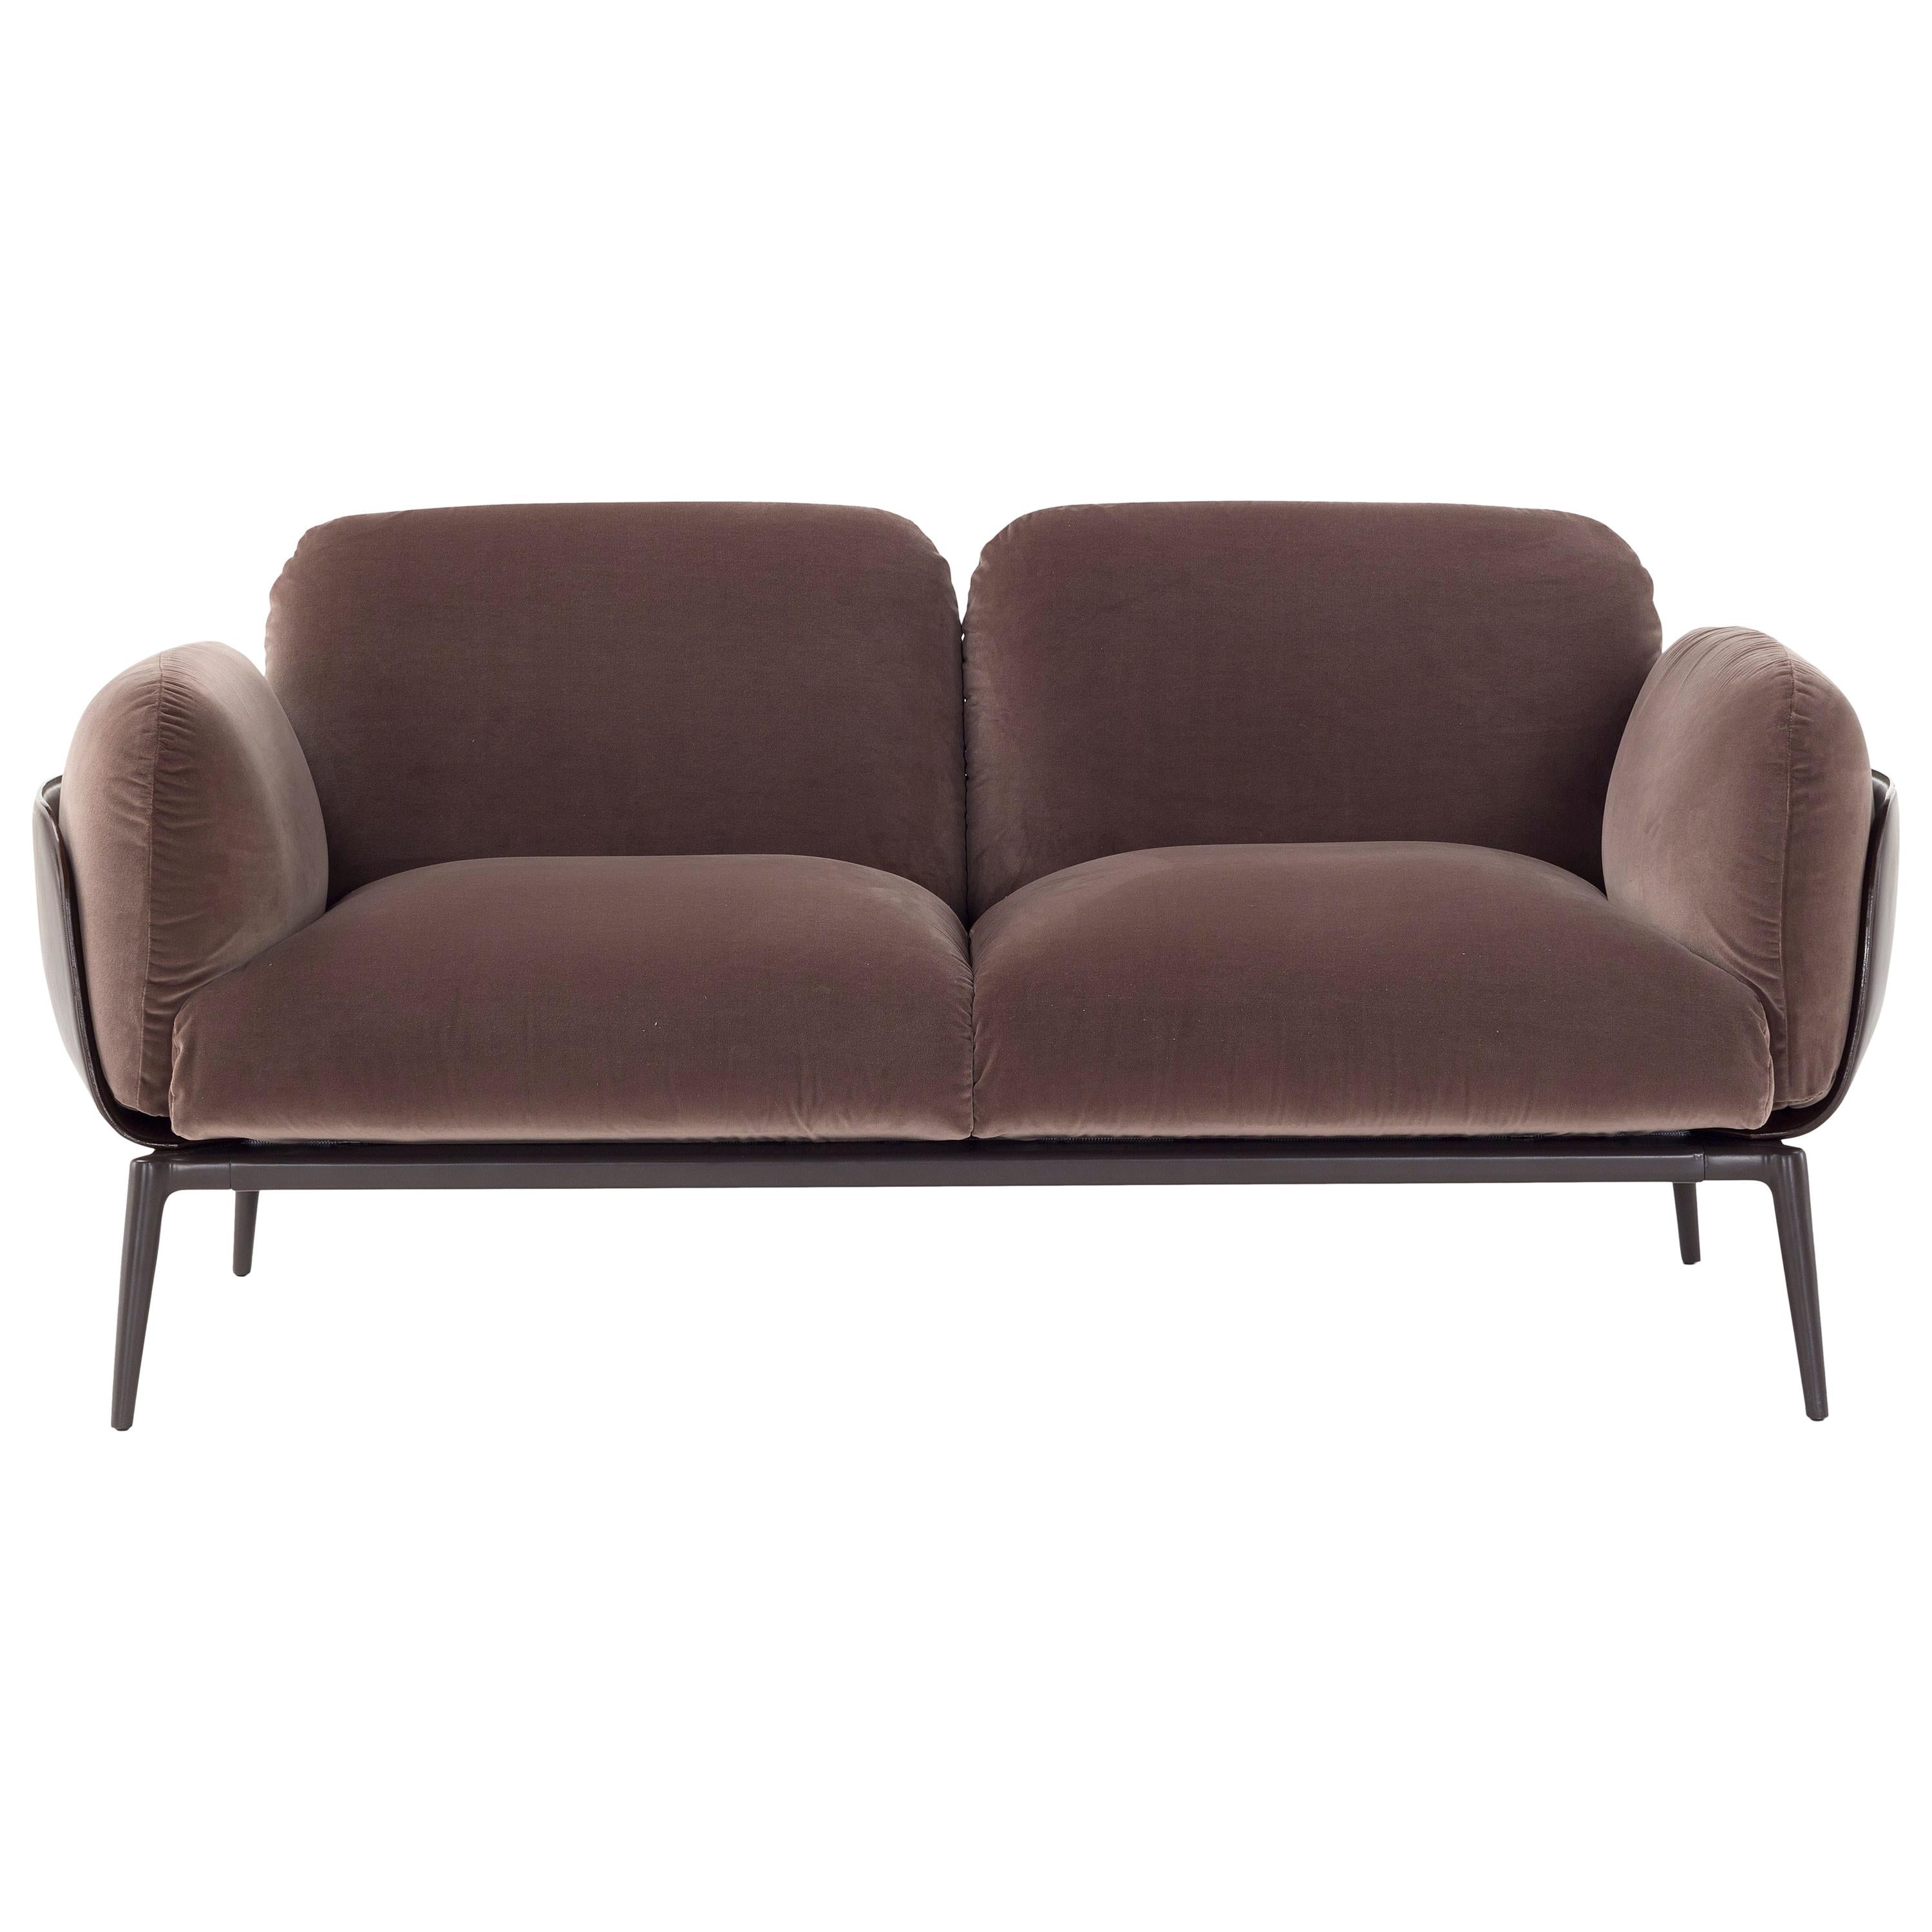 Amura 'Brooklyn' Sofa in Brown Velvet and Cuoio by Stefano Bigi For Sale